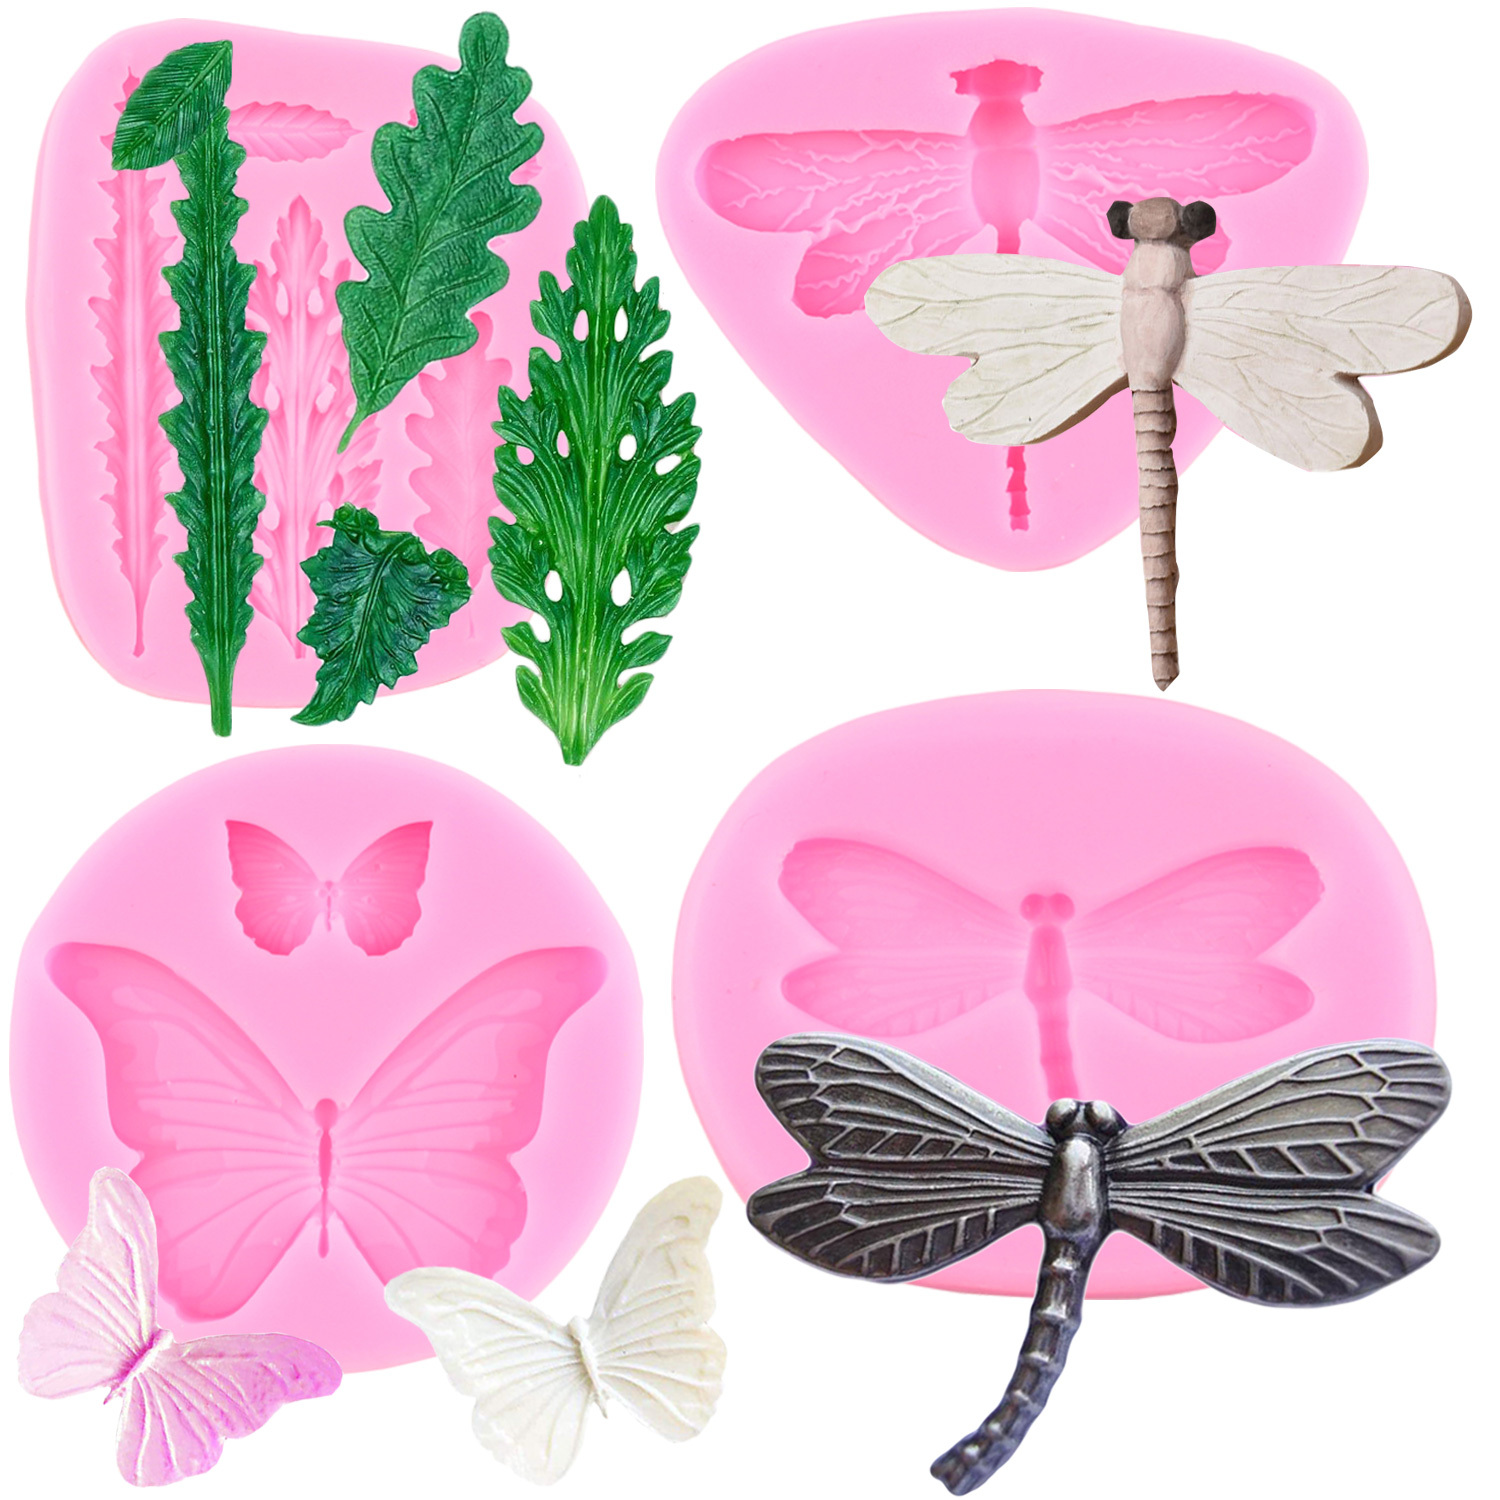 Dragonfly Or Butterfly Chocolate Mold, 3d Flying Insects Silicone Mold,  Optional Butterfly Dragonfly Or Greenery Leaf Candy Mold, Fondant Mold,  Biscuit Mold, For Diy Cake Decorating Tool, Baking Tools, Kitchen  Accessories, Home